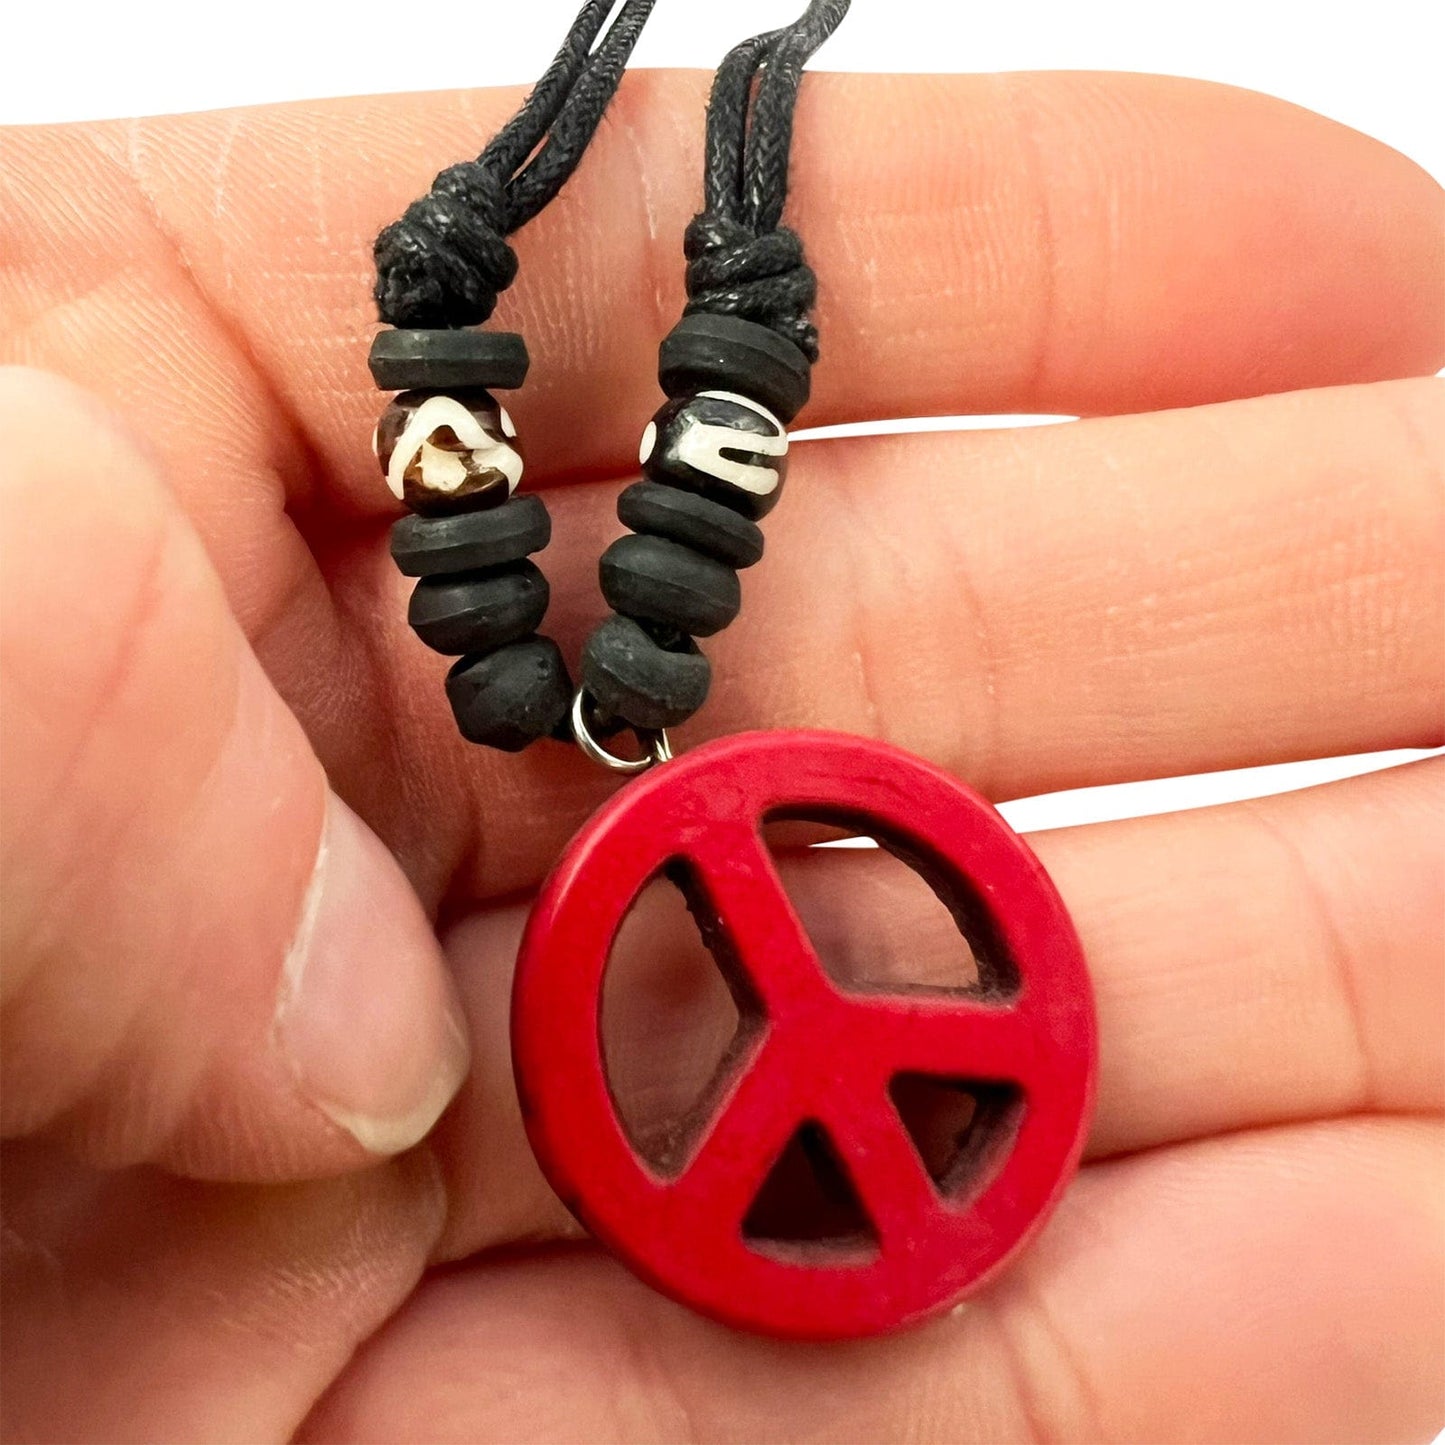 Red Peace Sign Symbol Pendant Necklace Black Cord Chain Mens Womens Jewellery